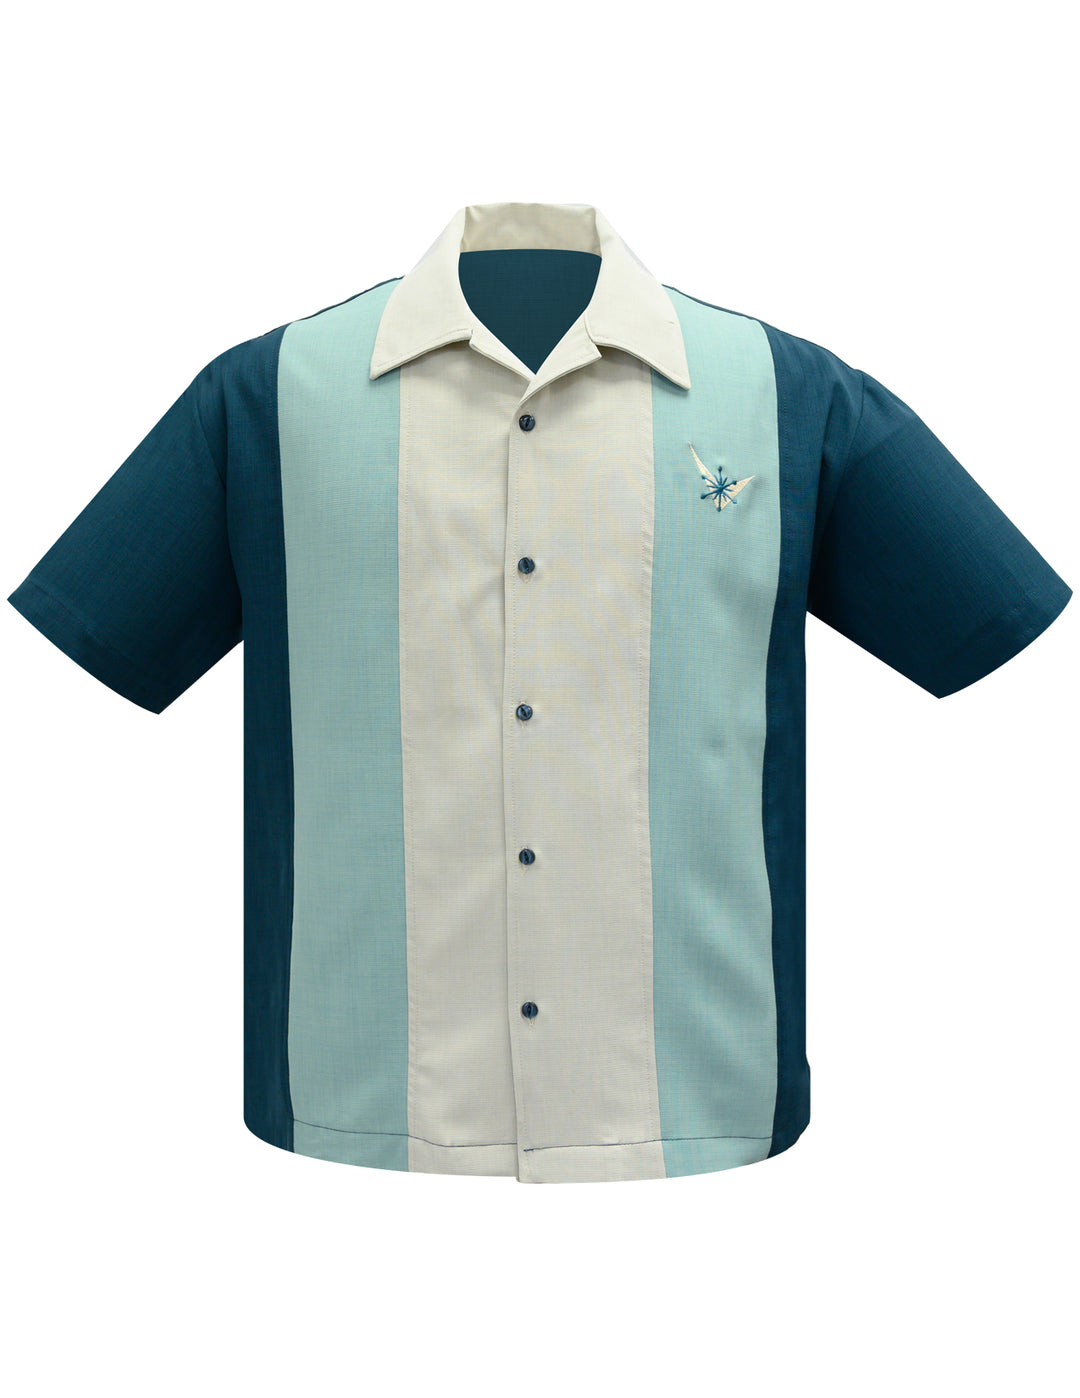 Atomic Mad Men Bowling Shirt in Teal/Mint/Stone by Steady Clothing